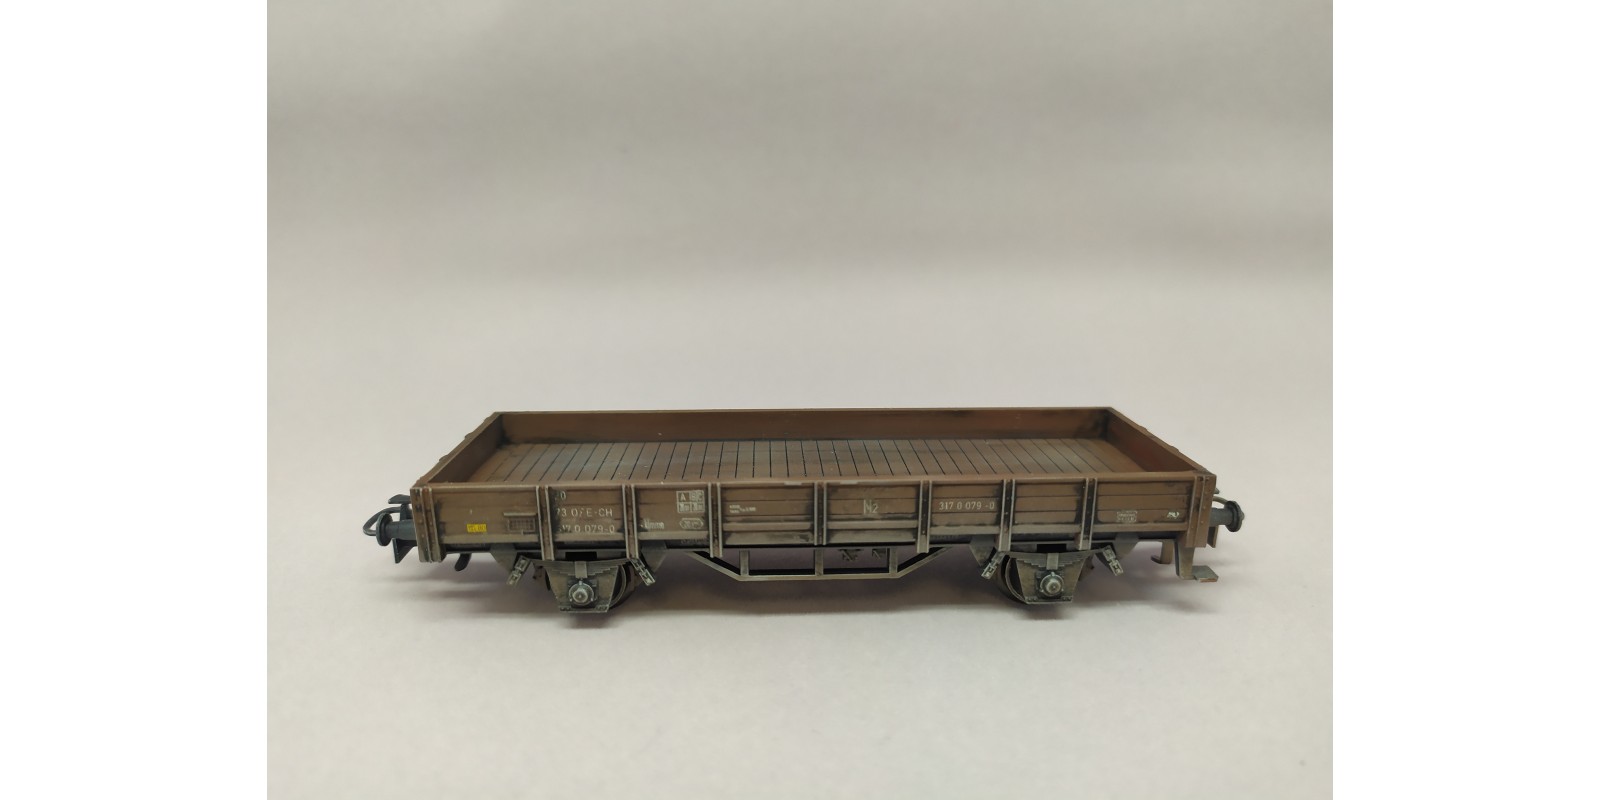 4423H OSE N2 lowside wagons 317 0 000-173